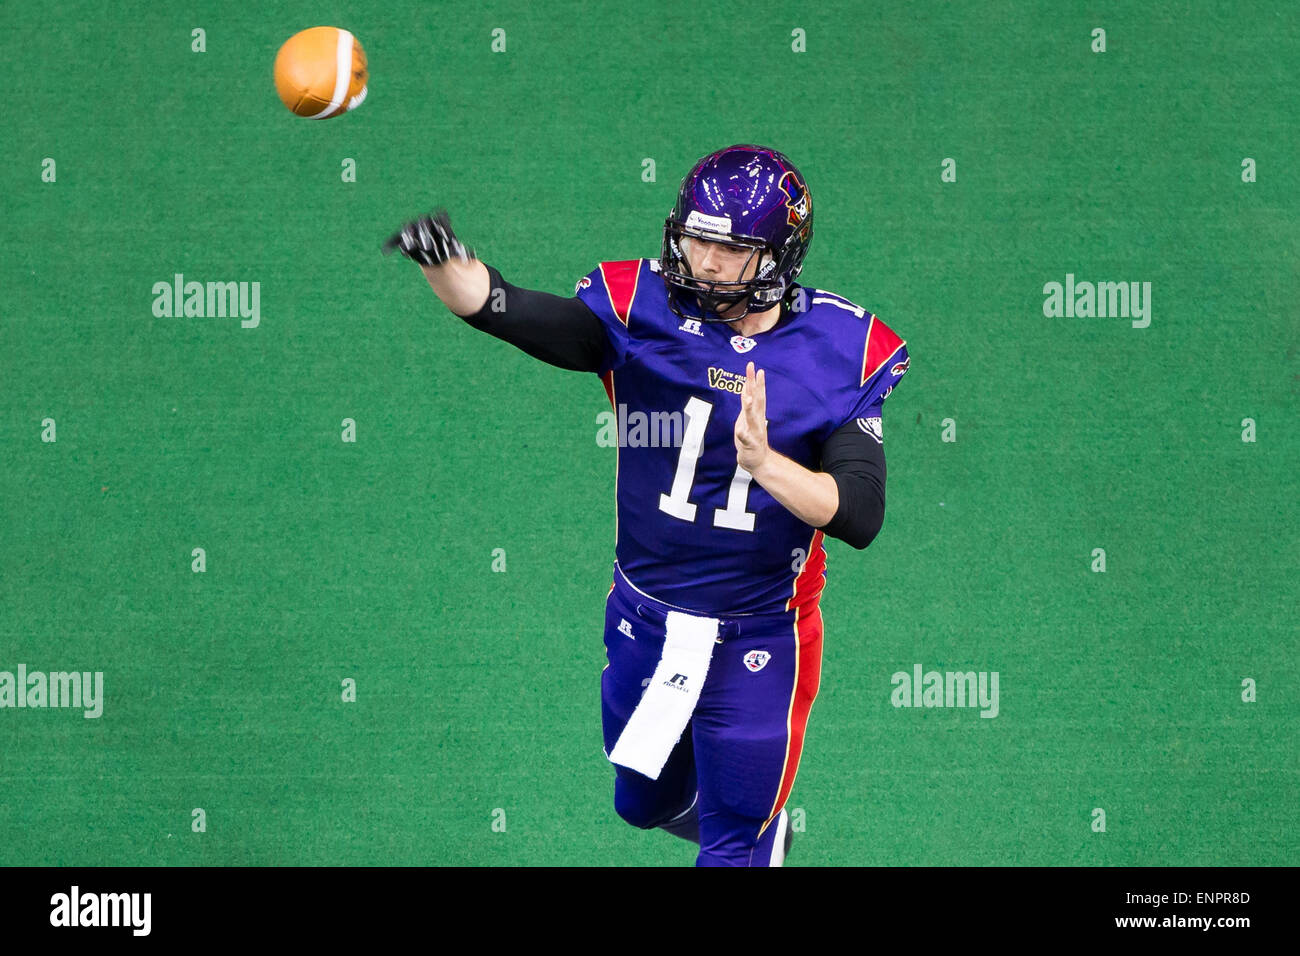 New Orleans, LA, USA. 9th May, 2015. New Orleans VooDoo qb Sam Durley (11) during the game between the Arizona Rattlers and New Orleans VooDoo at Smoothie King Center in New Orleans, LA. Arizona Rattlers defeated New Orleans VooDoo 47-39. Stephen Lew/CSM/Alamy Live News Stock Photo